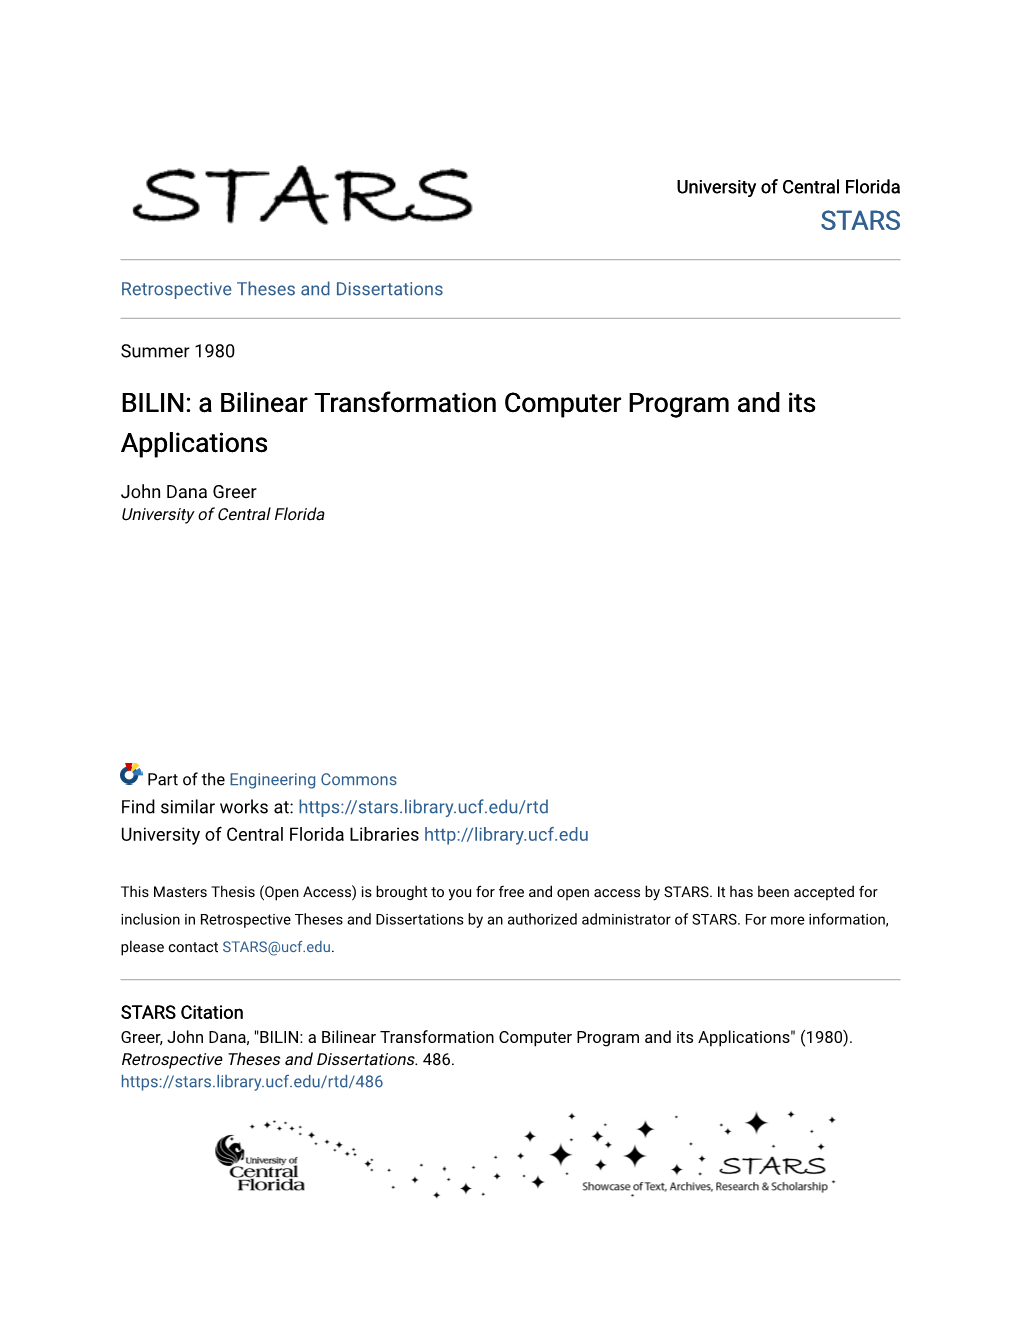 A Bilinear Transformation Computer Program and Its Applications